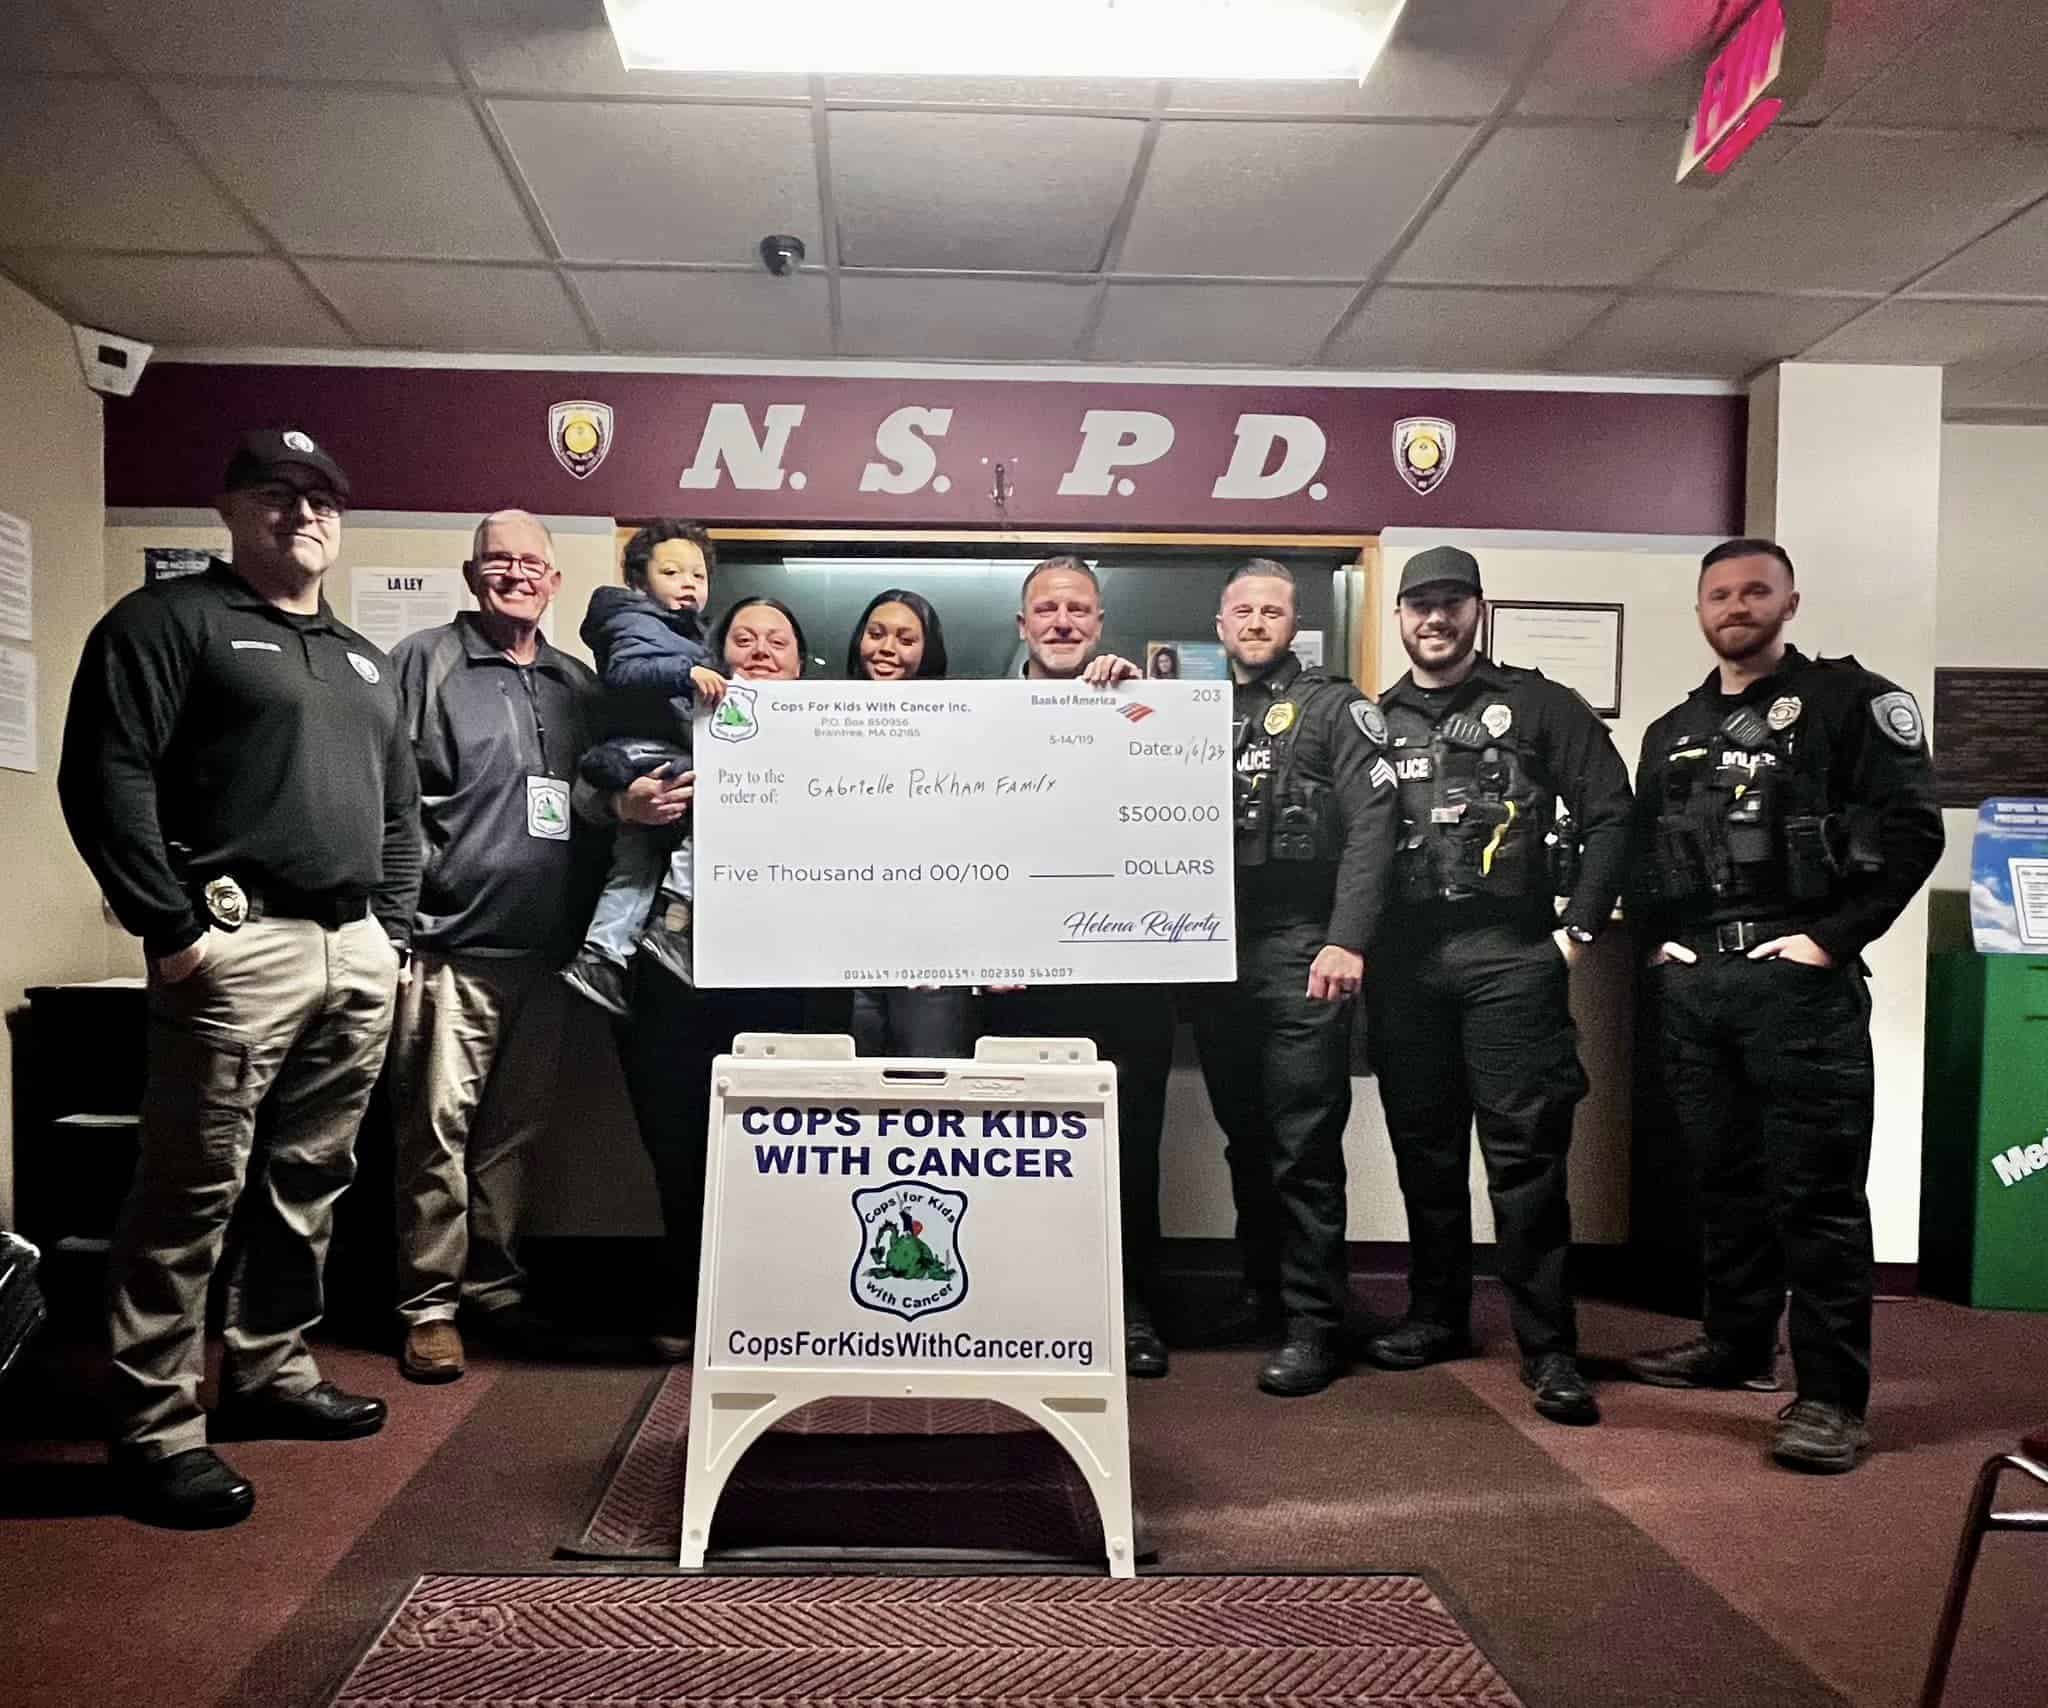 CFKWC made a donation to the Peckham family atthe North Smithfield Police Department, (RI)